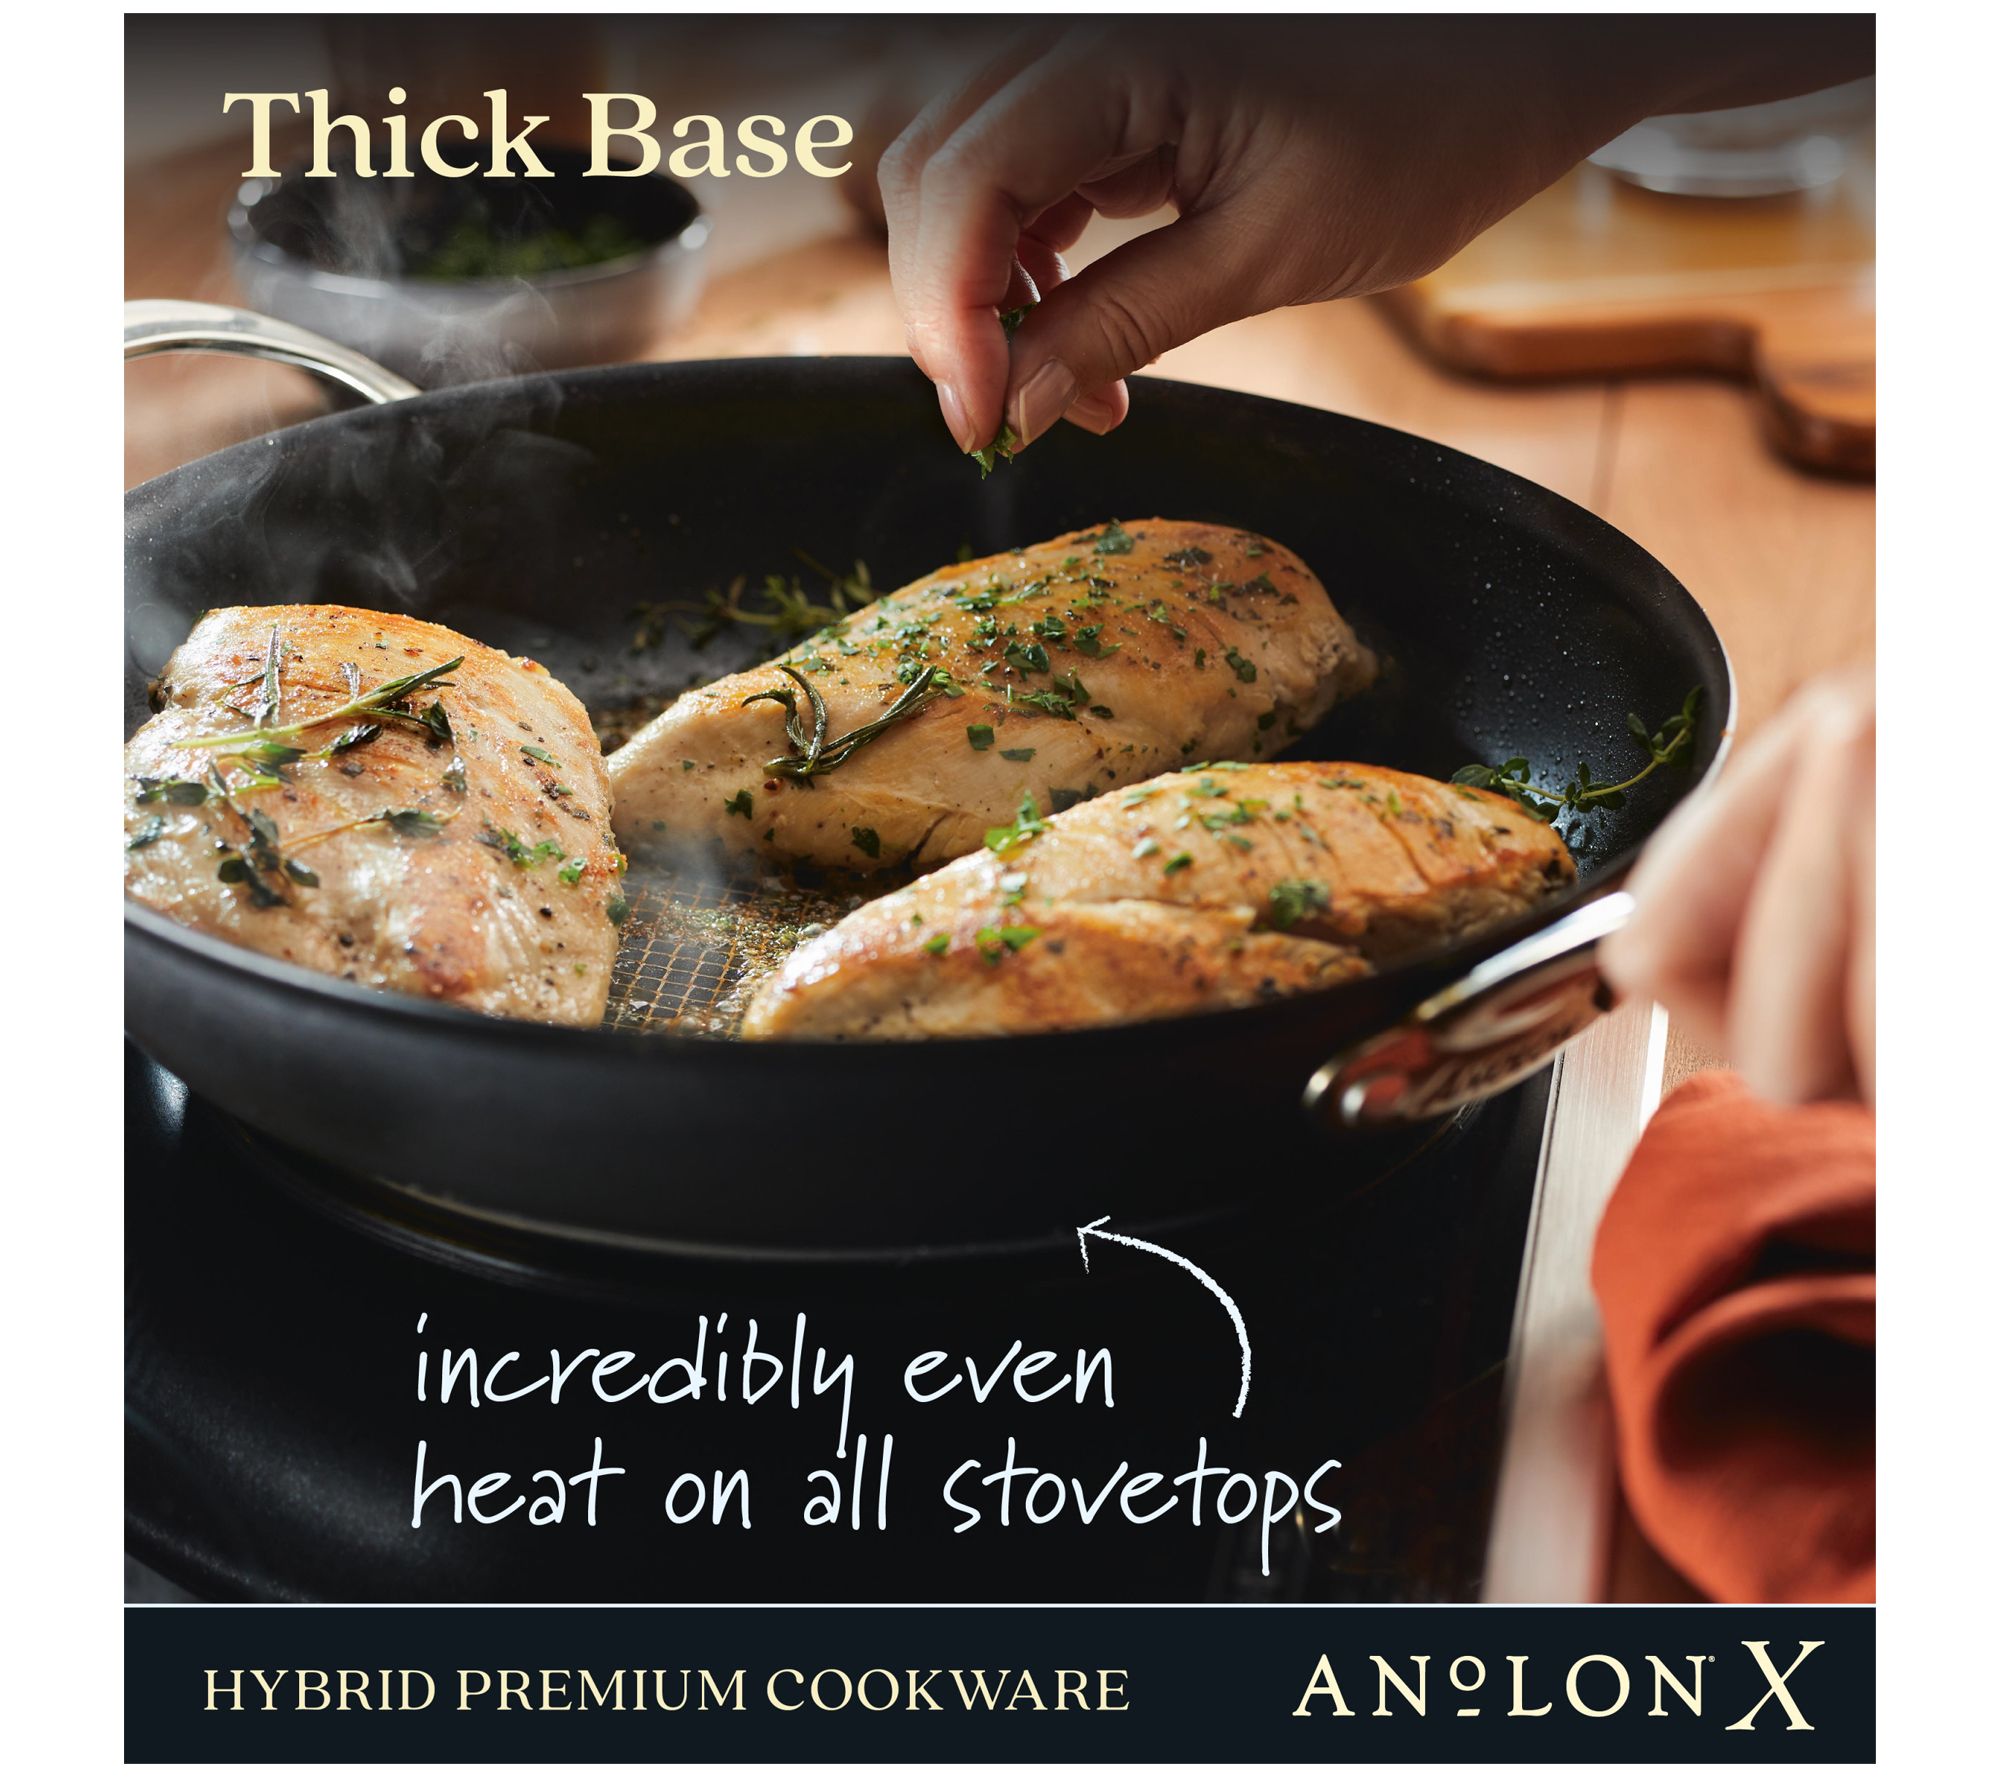 Anolon X Hybrid Nonstick Cookware Review - Consumer Reports